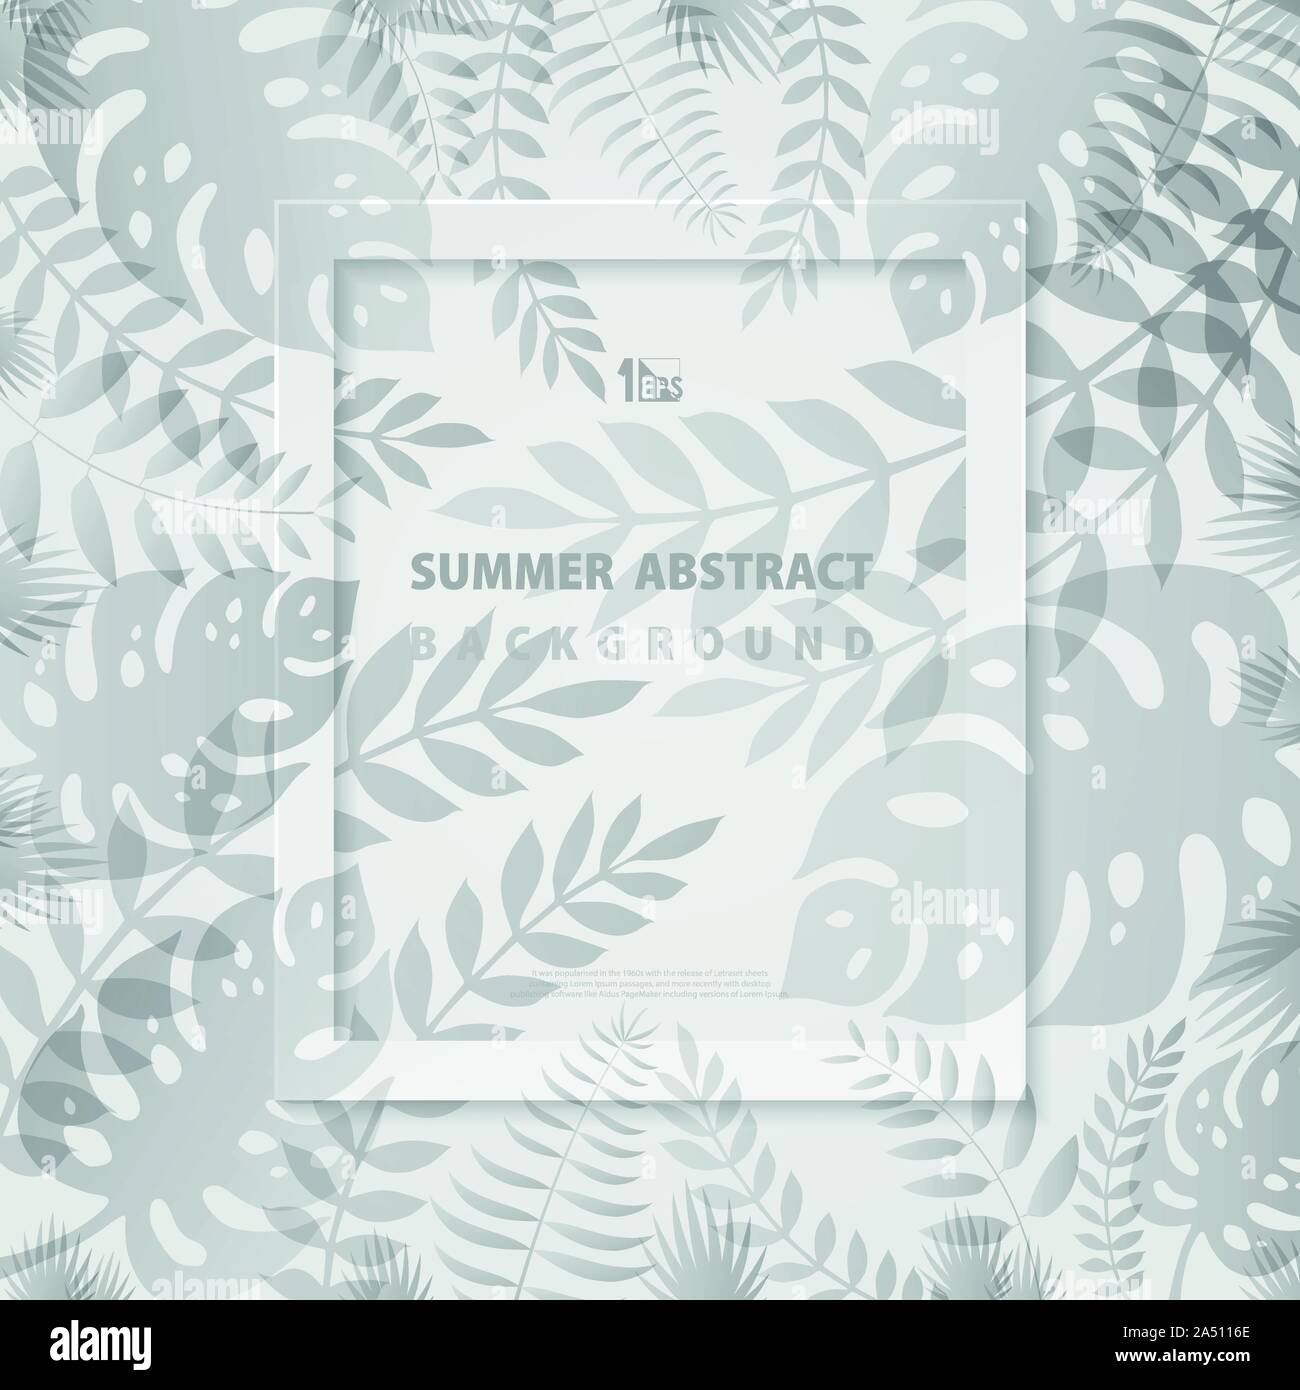 Abstract summer leaves design of trendy frame background. Decorate for poster, vacation artwork, festival, fresh content. illustration vector eps10 Stock Vector